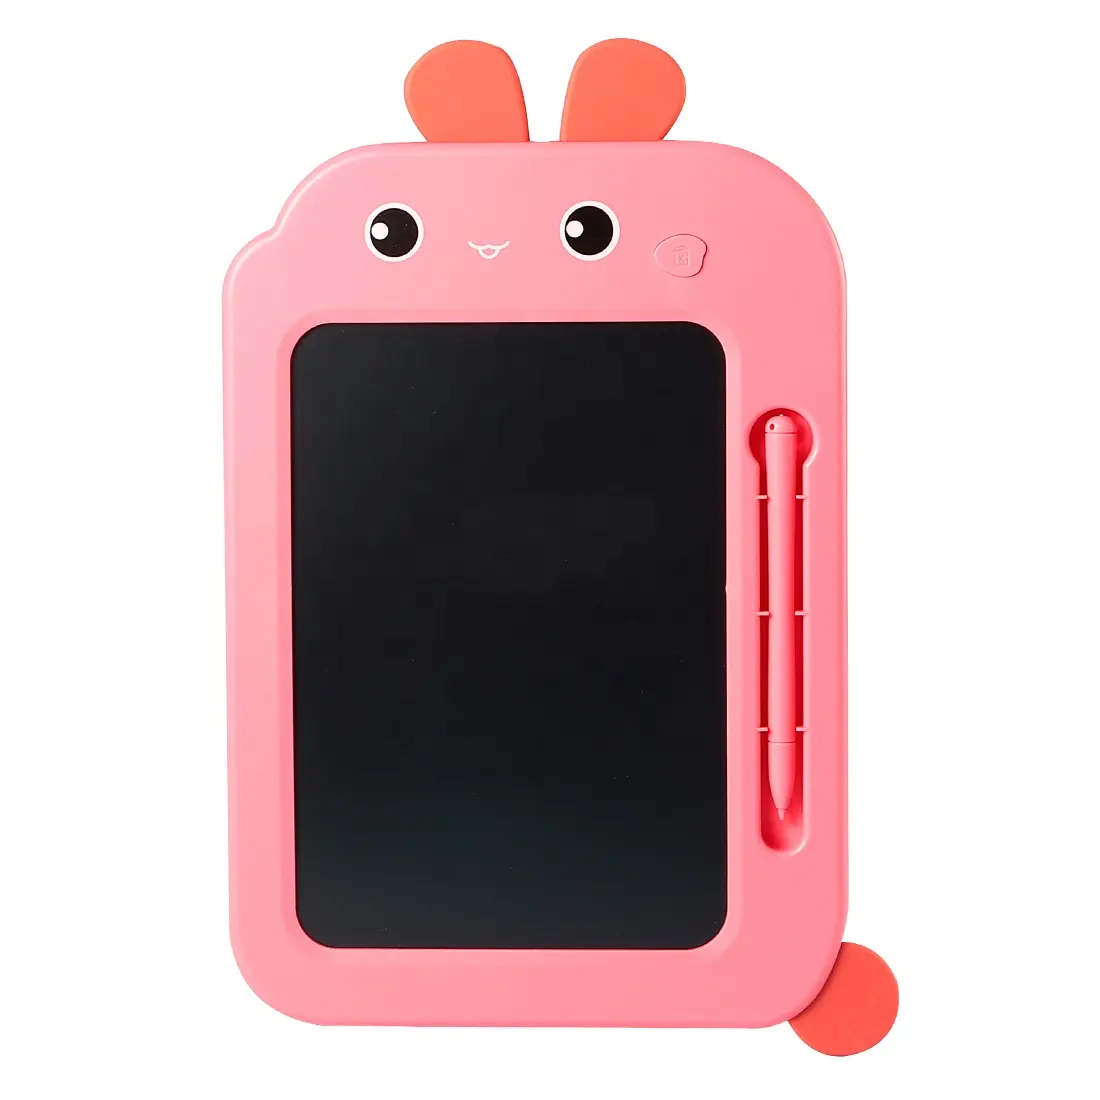 LCD Writing Tablet Doodle Board 7 Inch Colorful Drawing Kids Gifts Reusable Writing Pad Developmental Toys